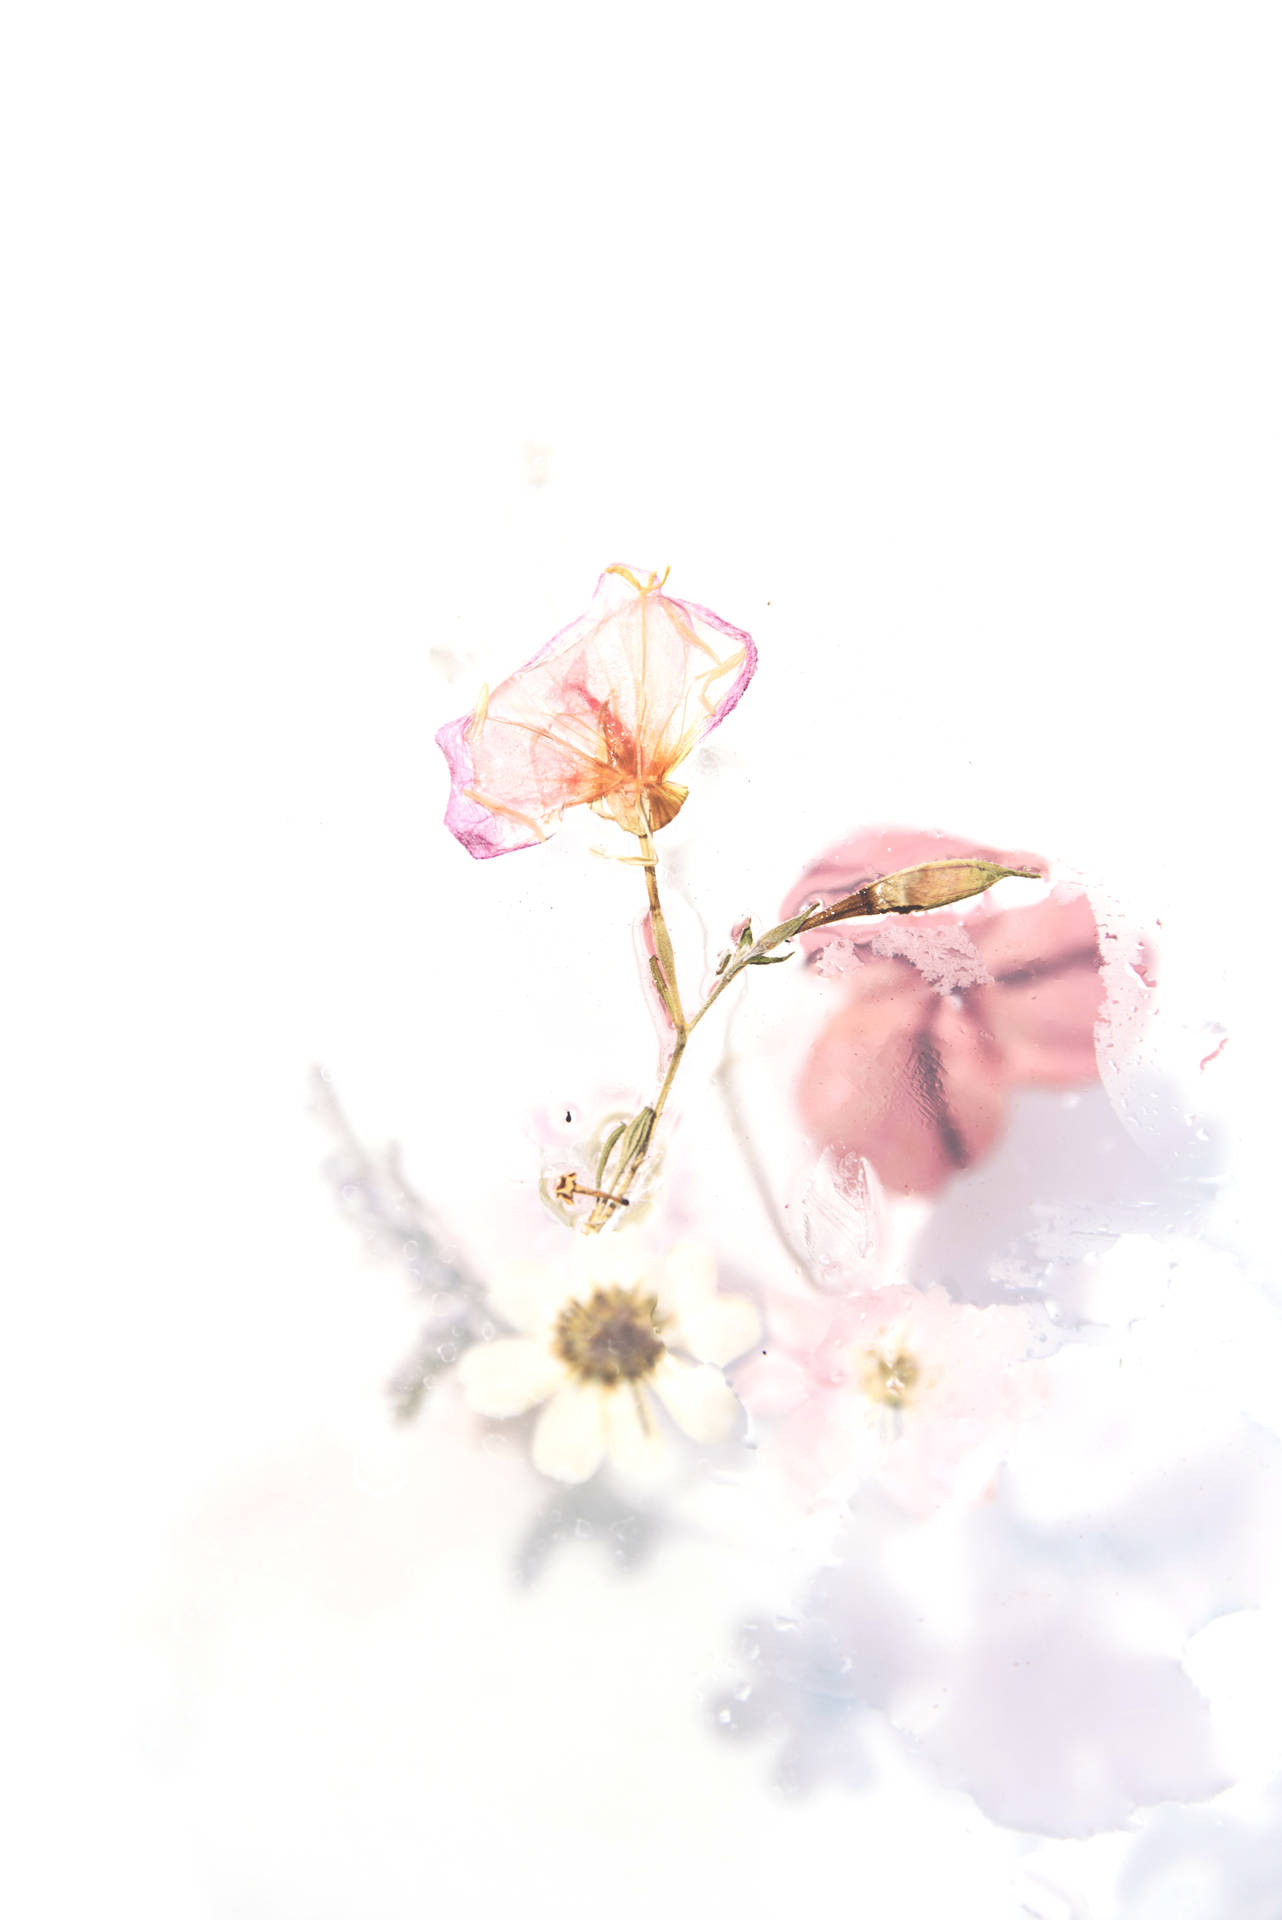 4016X6016 Light Pink Wallpaper and Background